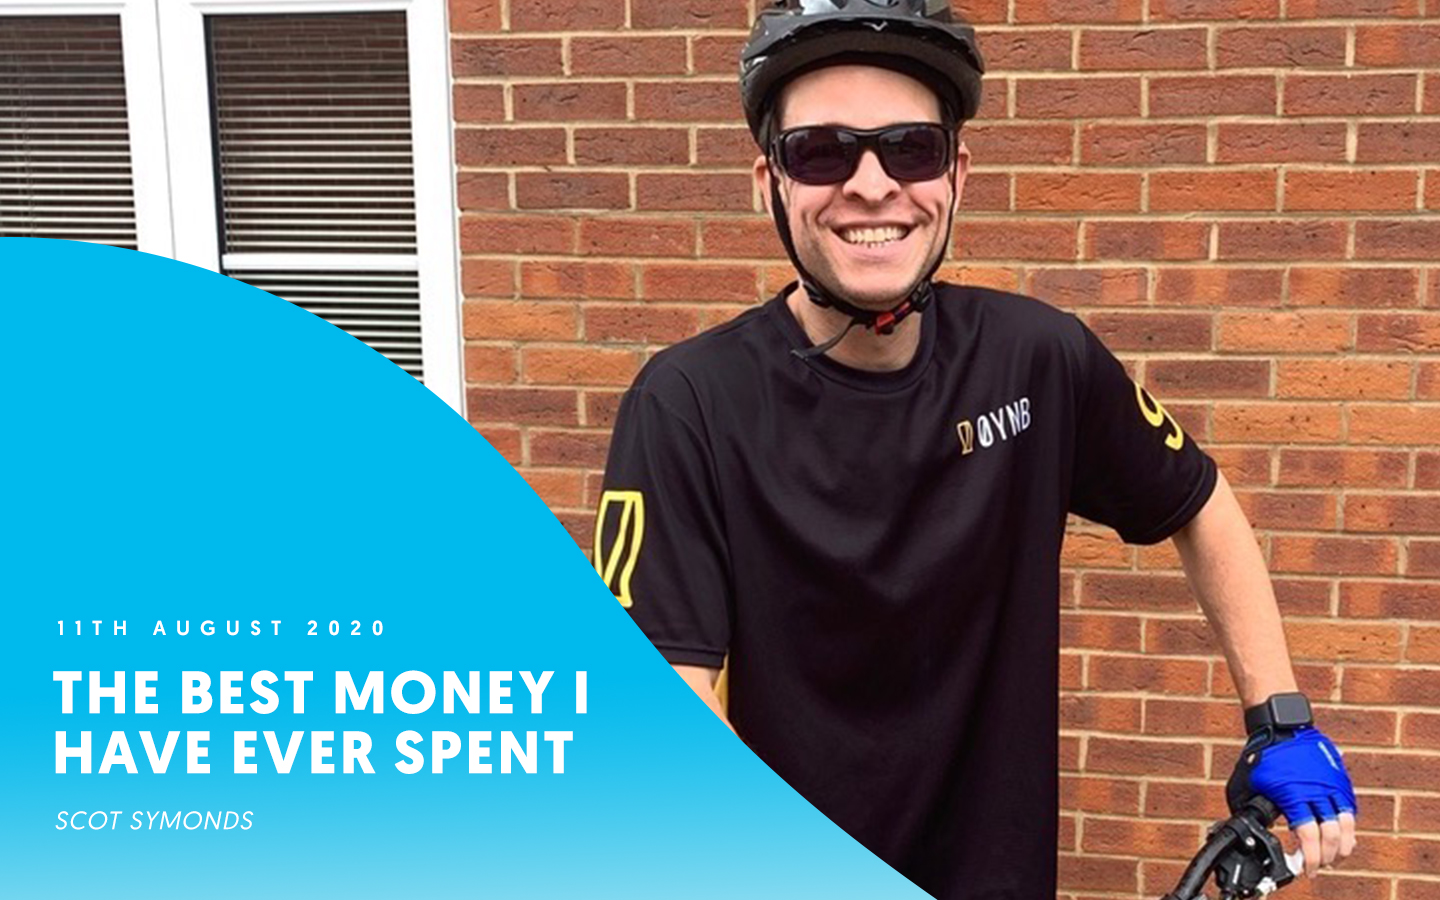 “The best money I have ever spent” – Scot Symonds